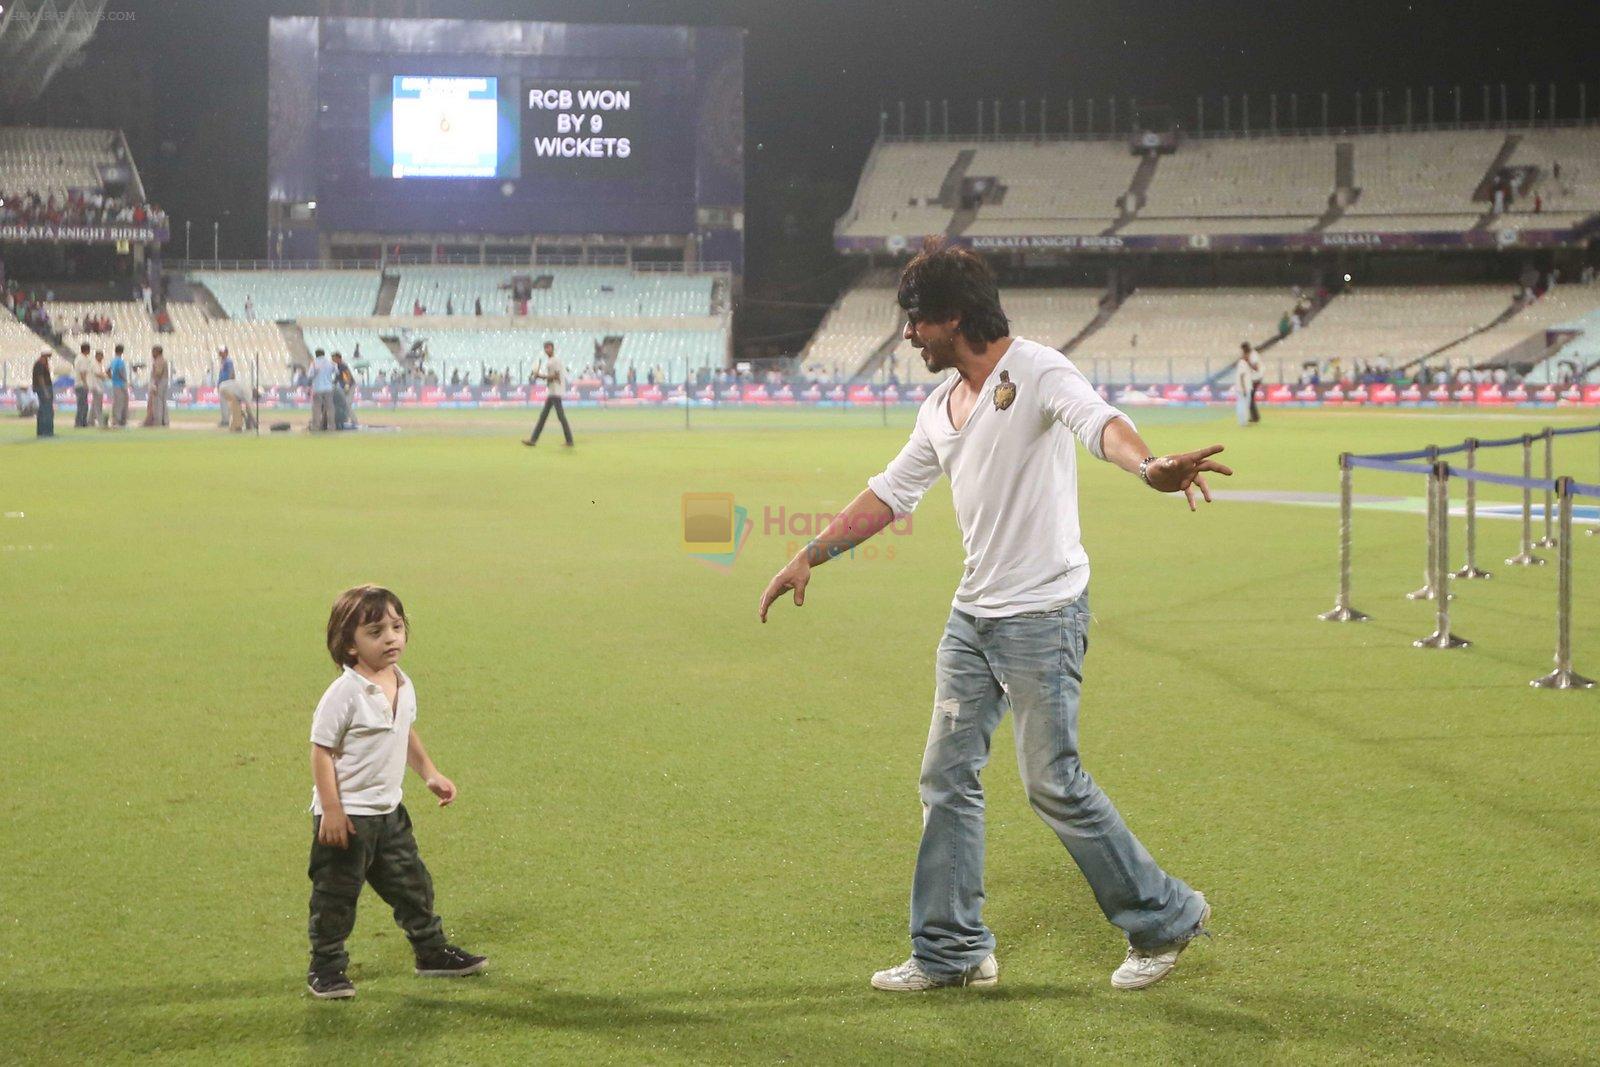 Shahrukh Khan with abram at eden gardens on 17th May 2016